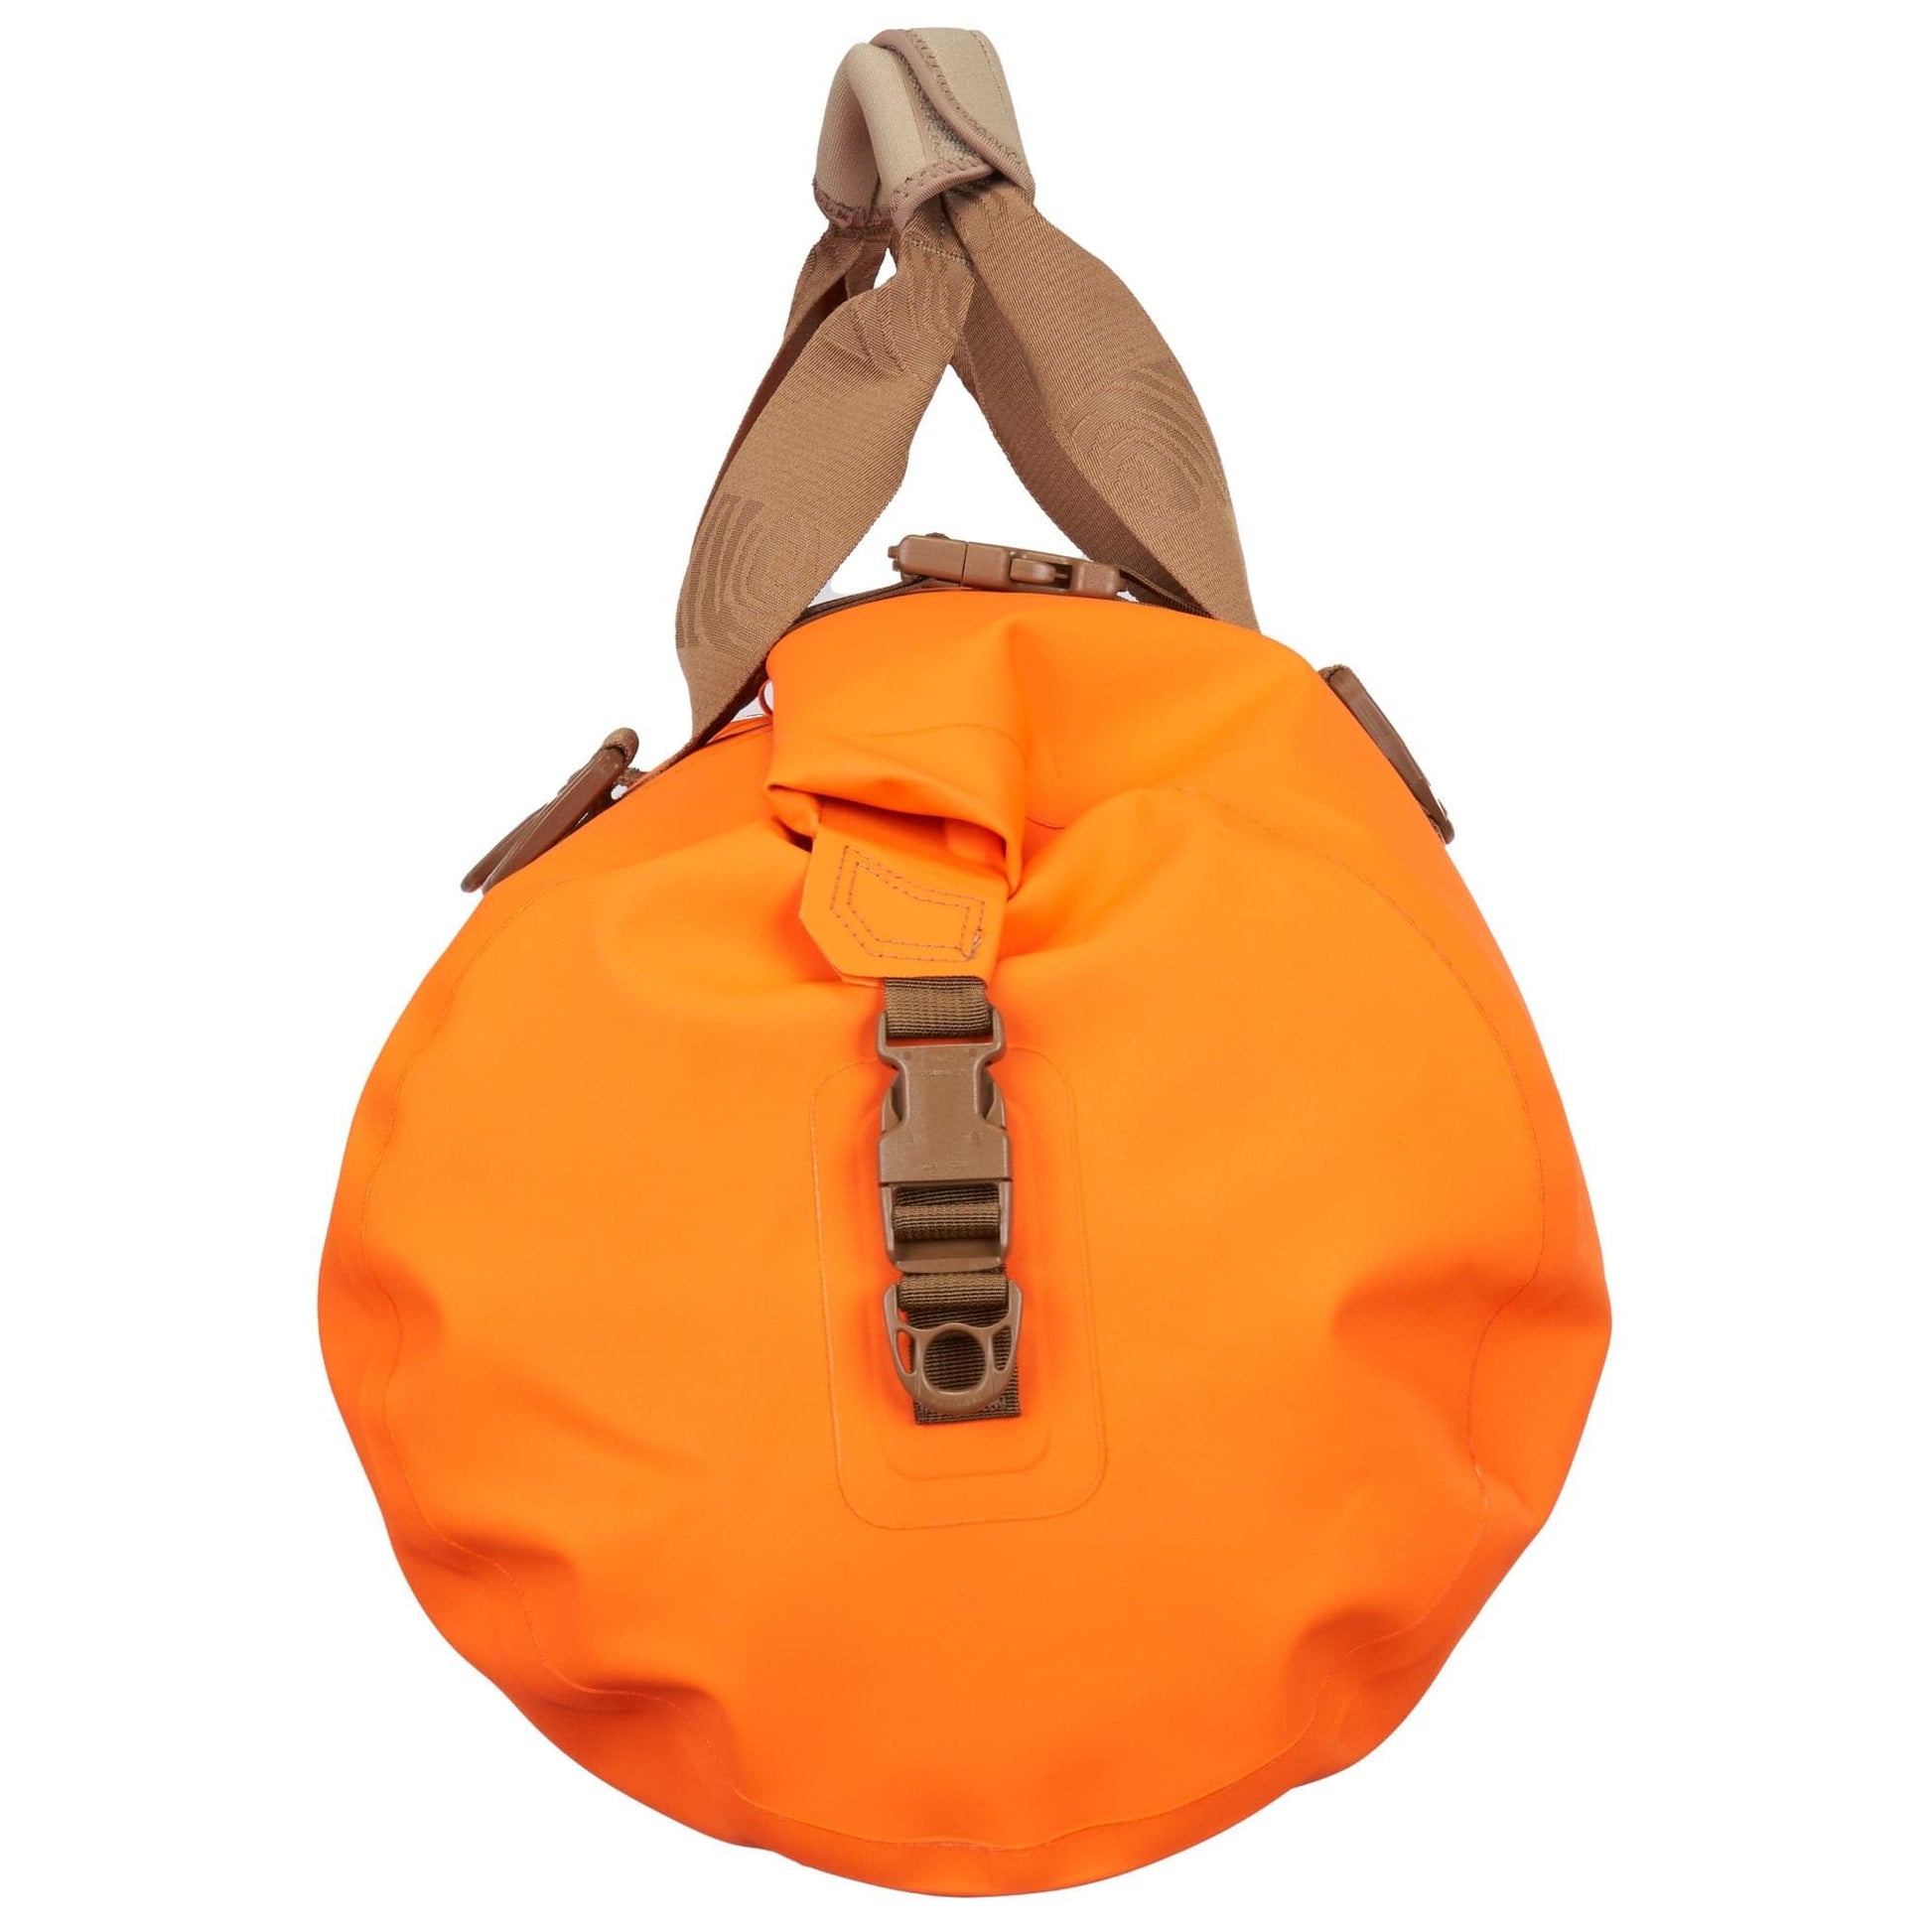 Featuring the Yukon Duffel dry bag manufactured by Watershed shown here from a third angle.